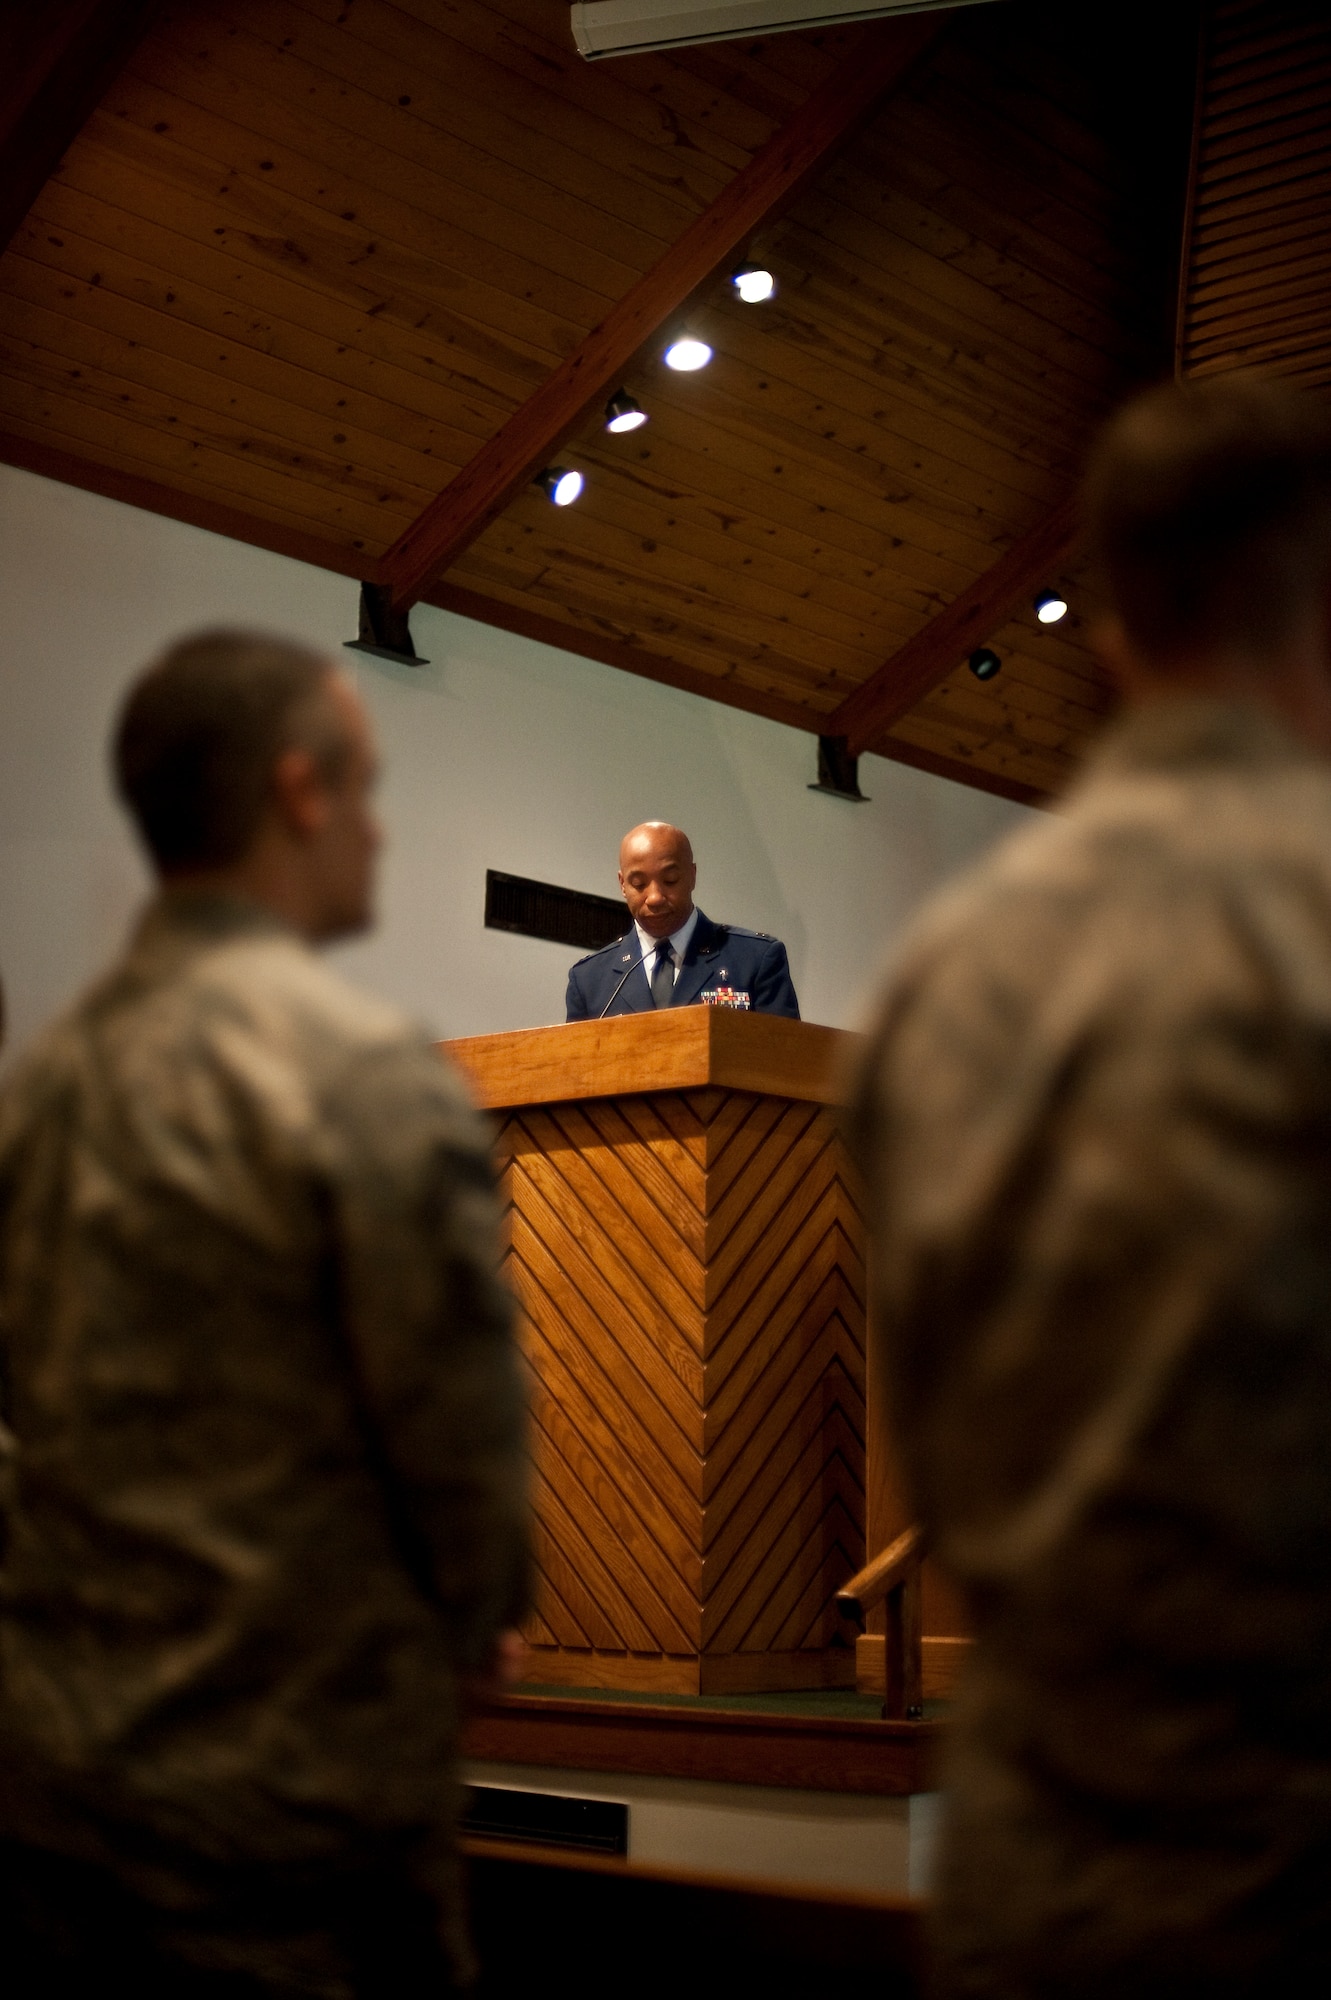 Capt. Ronnelle Armstrong, a chaplain from the 1st Special Operations Wing, provides the invocation during a memorial service at the base chapel at Hurlburt Field, Fla., March 16, 2012. The service honored the life and legacy of Rony, a deceased military working dog from the 1st Special Operations Security Forces Squadron. (U.S. Air Force photo/Airman 1st Class Christopher Williams)(Released)